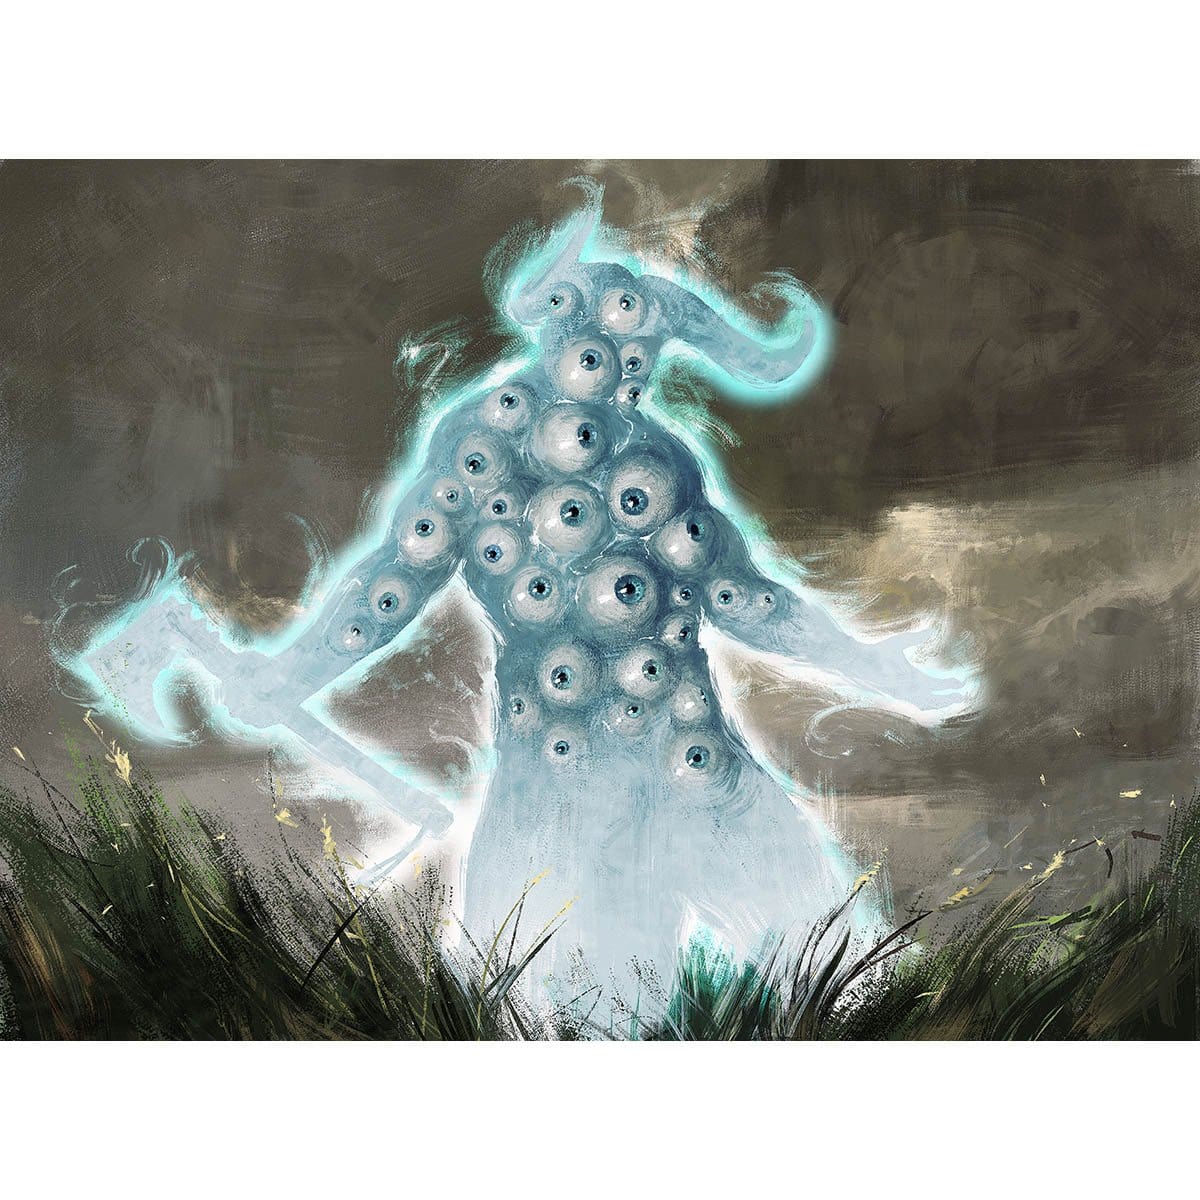 Blink of an Eye Print - Print - Original Magic Art - Accessories for Magic the Gathering and other card games